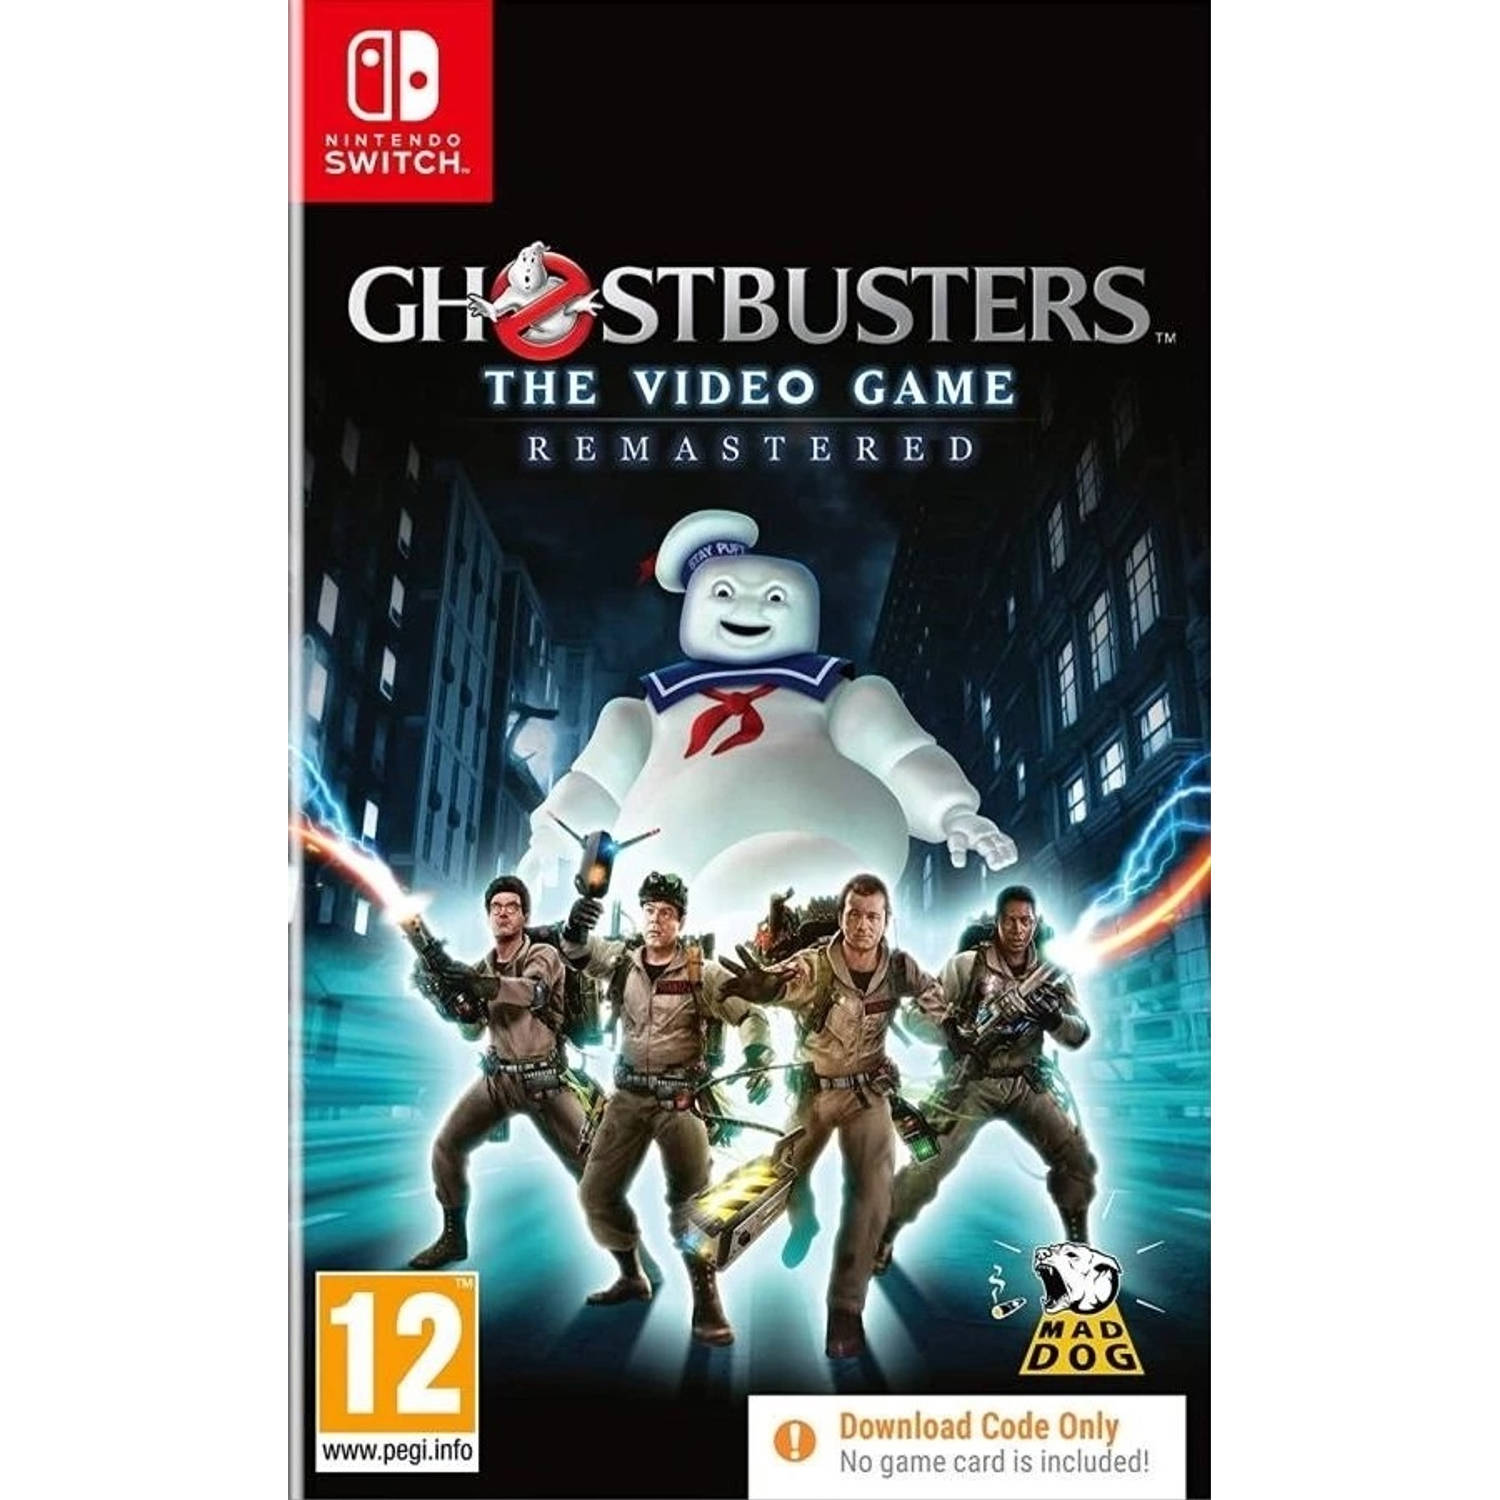 Ghostbusters the Videogame: Remastered - Nintendo Switch